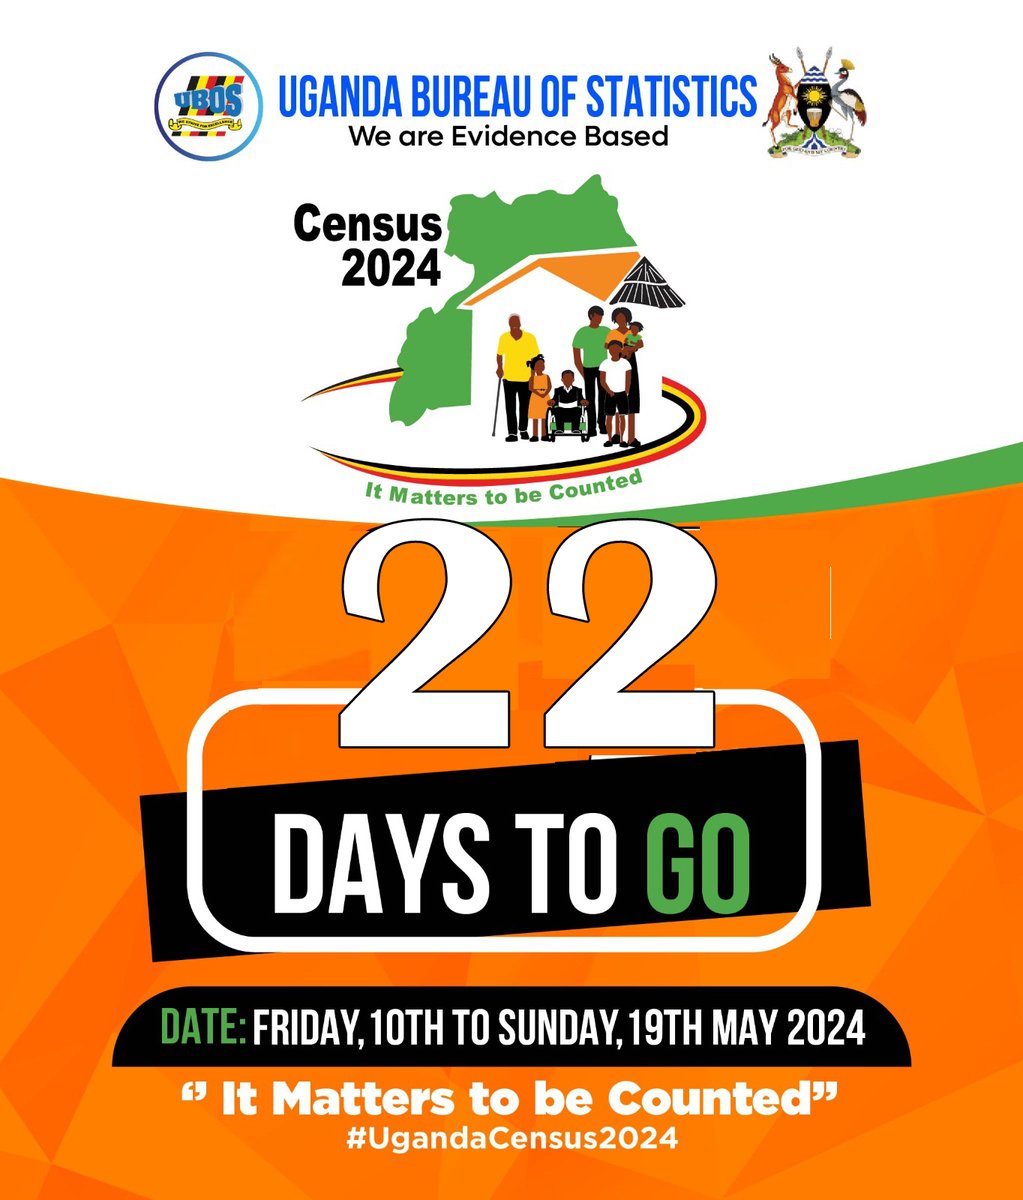 Greetings, Uganda! Are we all set for the 2024 National Census happening on the 10th of May? Only 22 days left. Let's stand up and be counted! #UgandaCensus2024 #UGCensusCountdown